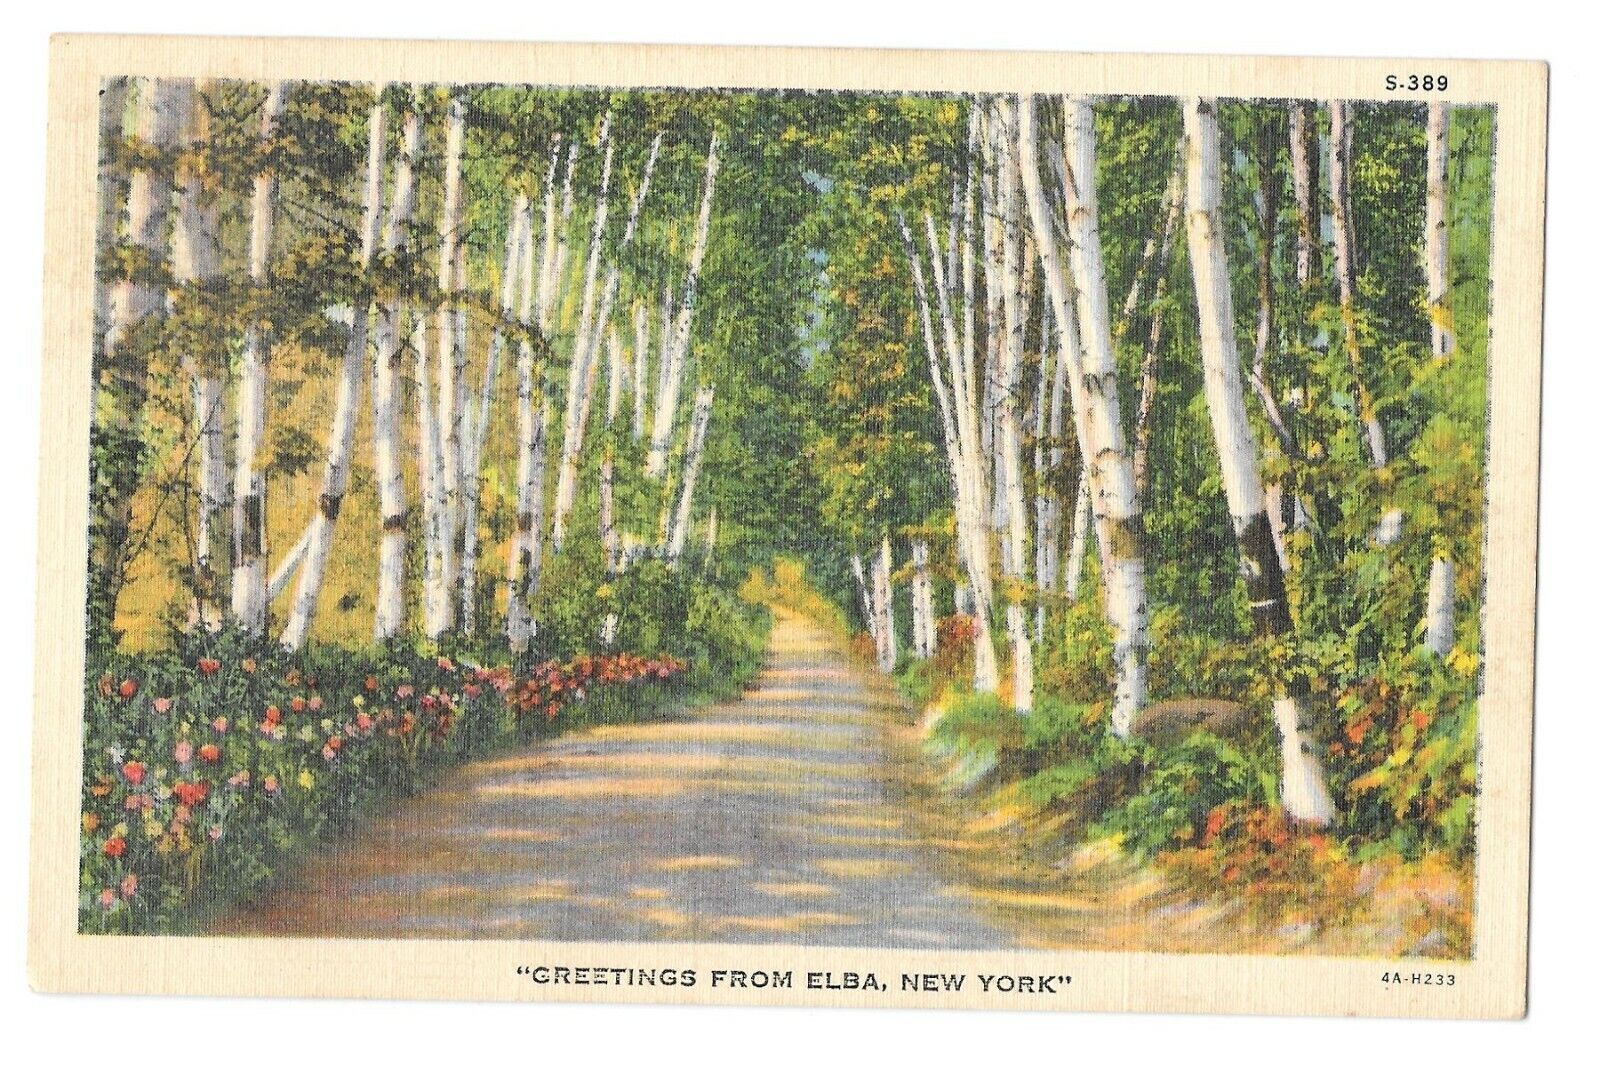 Vintage Postcard Greetings from Elba, New York PM 1946 CT Landscape Series